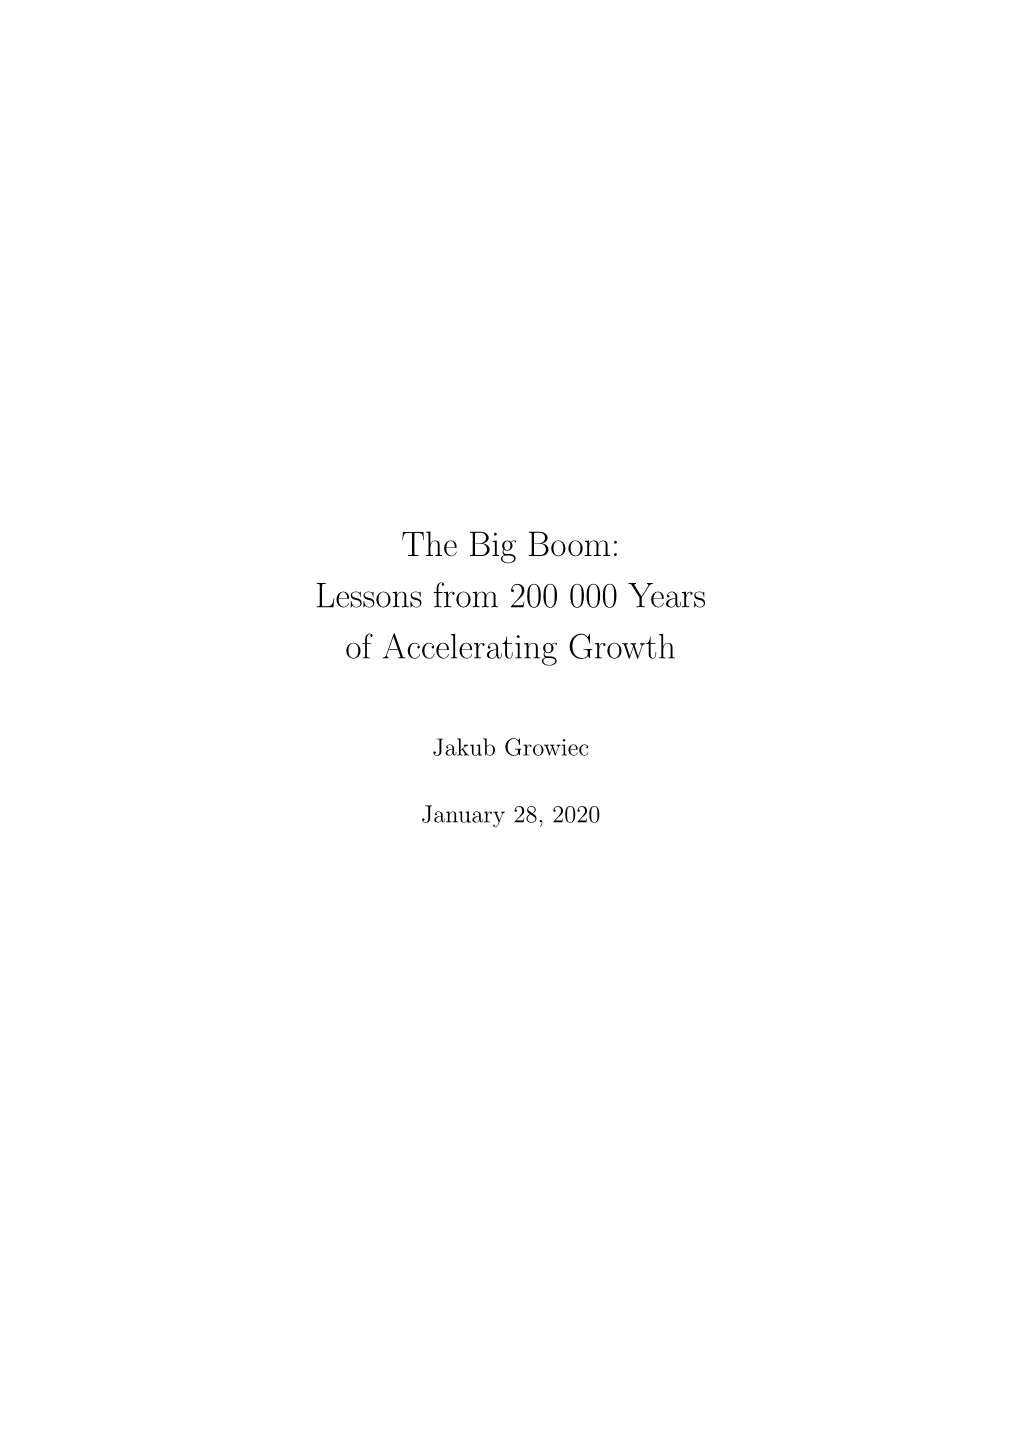 The Big Boom: Lessons from 200 000 Years of Accelerating Growth